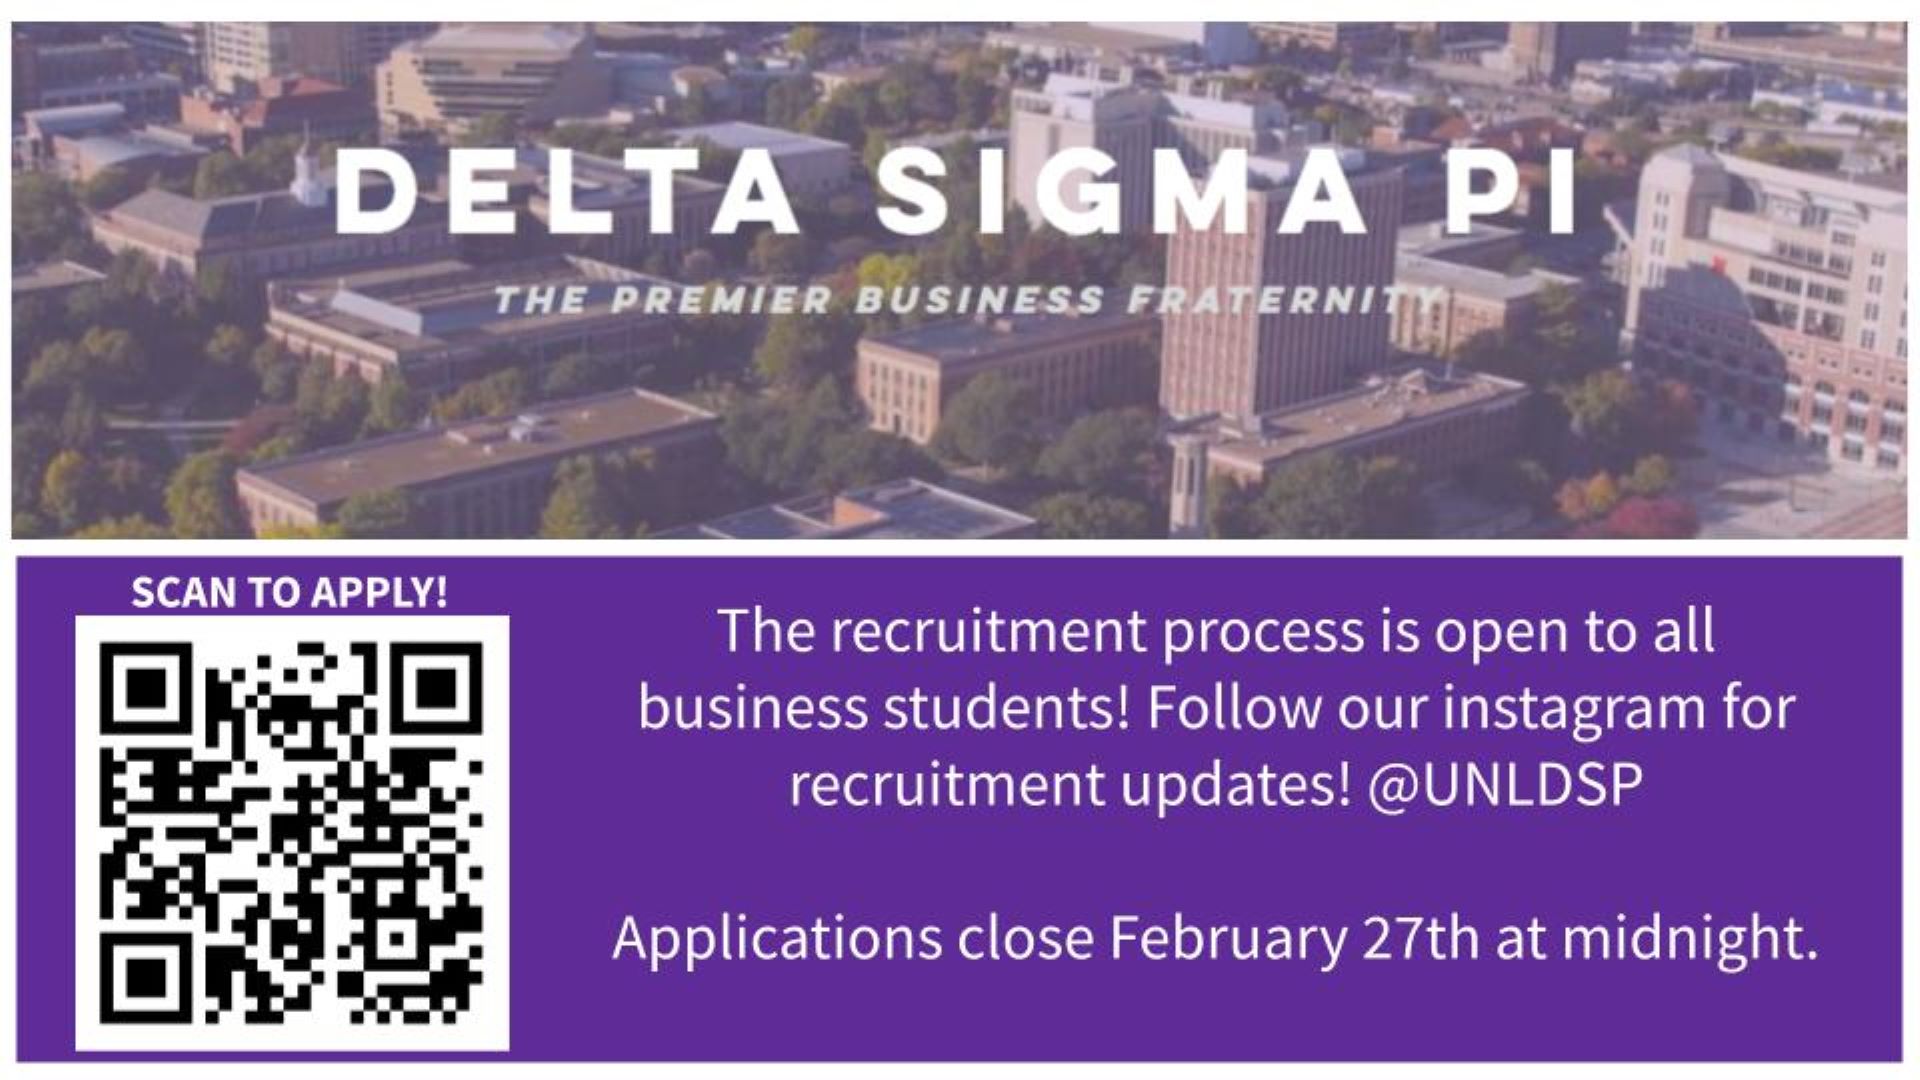 Interested in Joining Delta Sigma Pi?